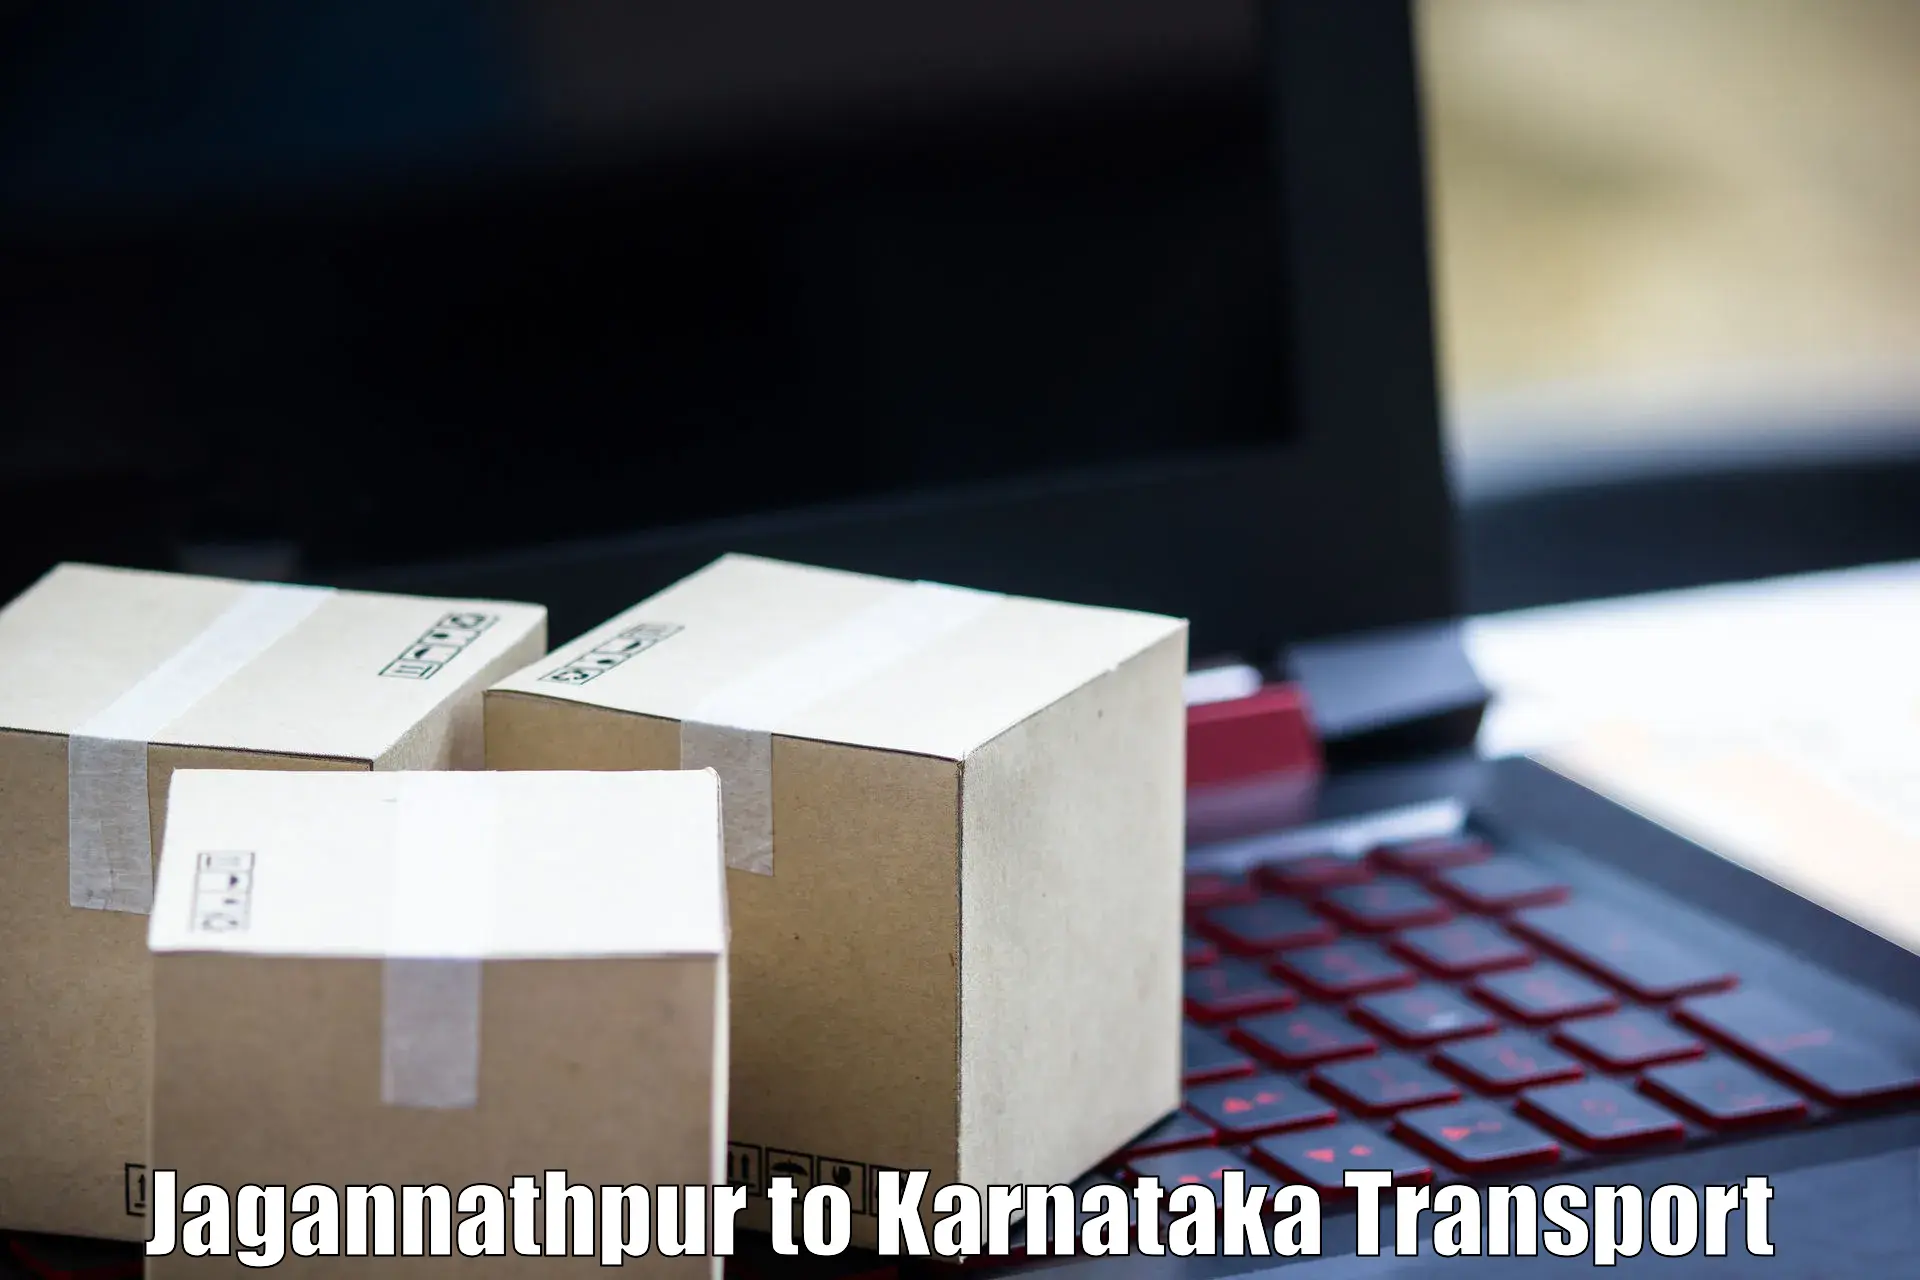 Shipping services Jagannathpur to Manipal Academy of Higher Education